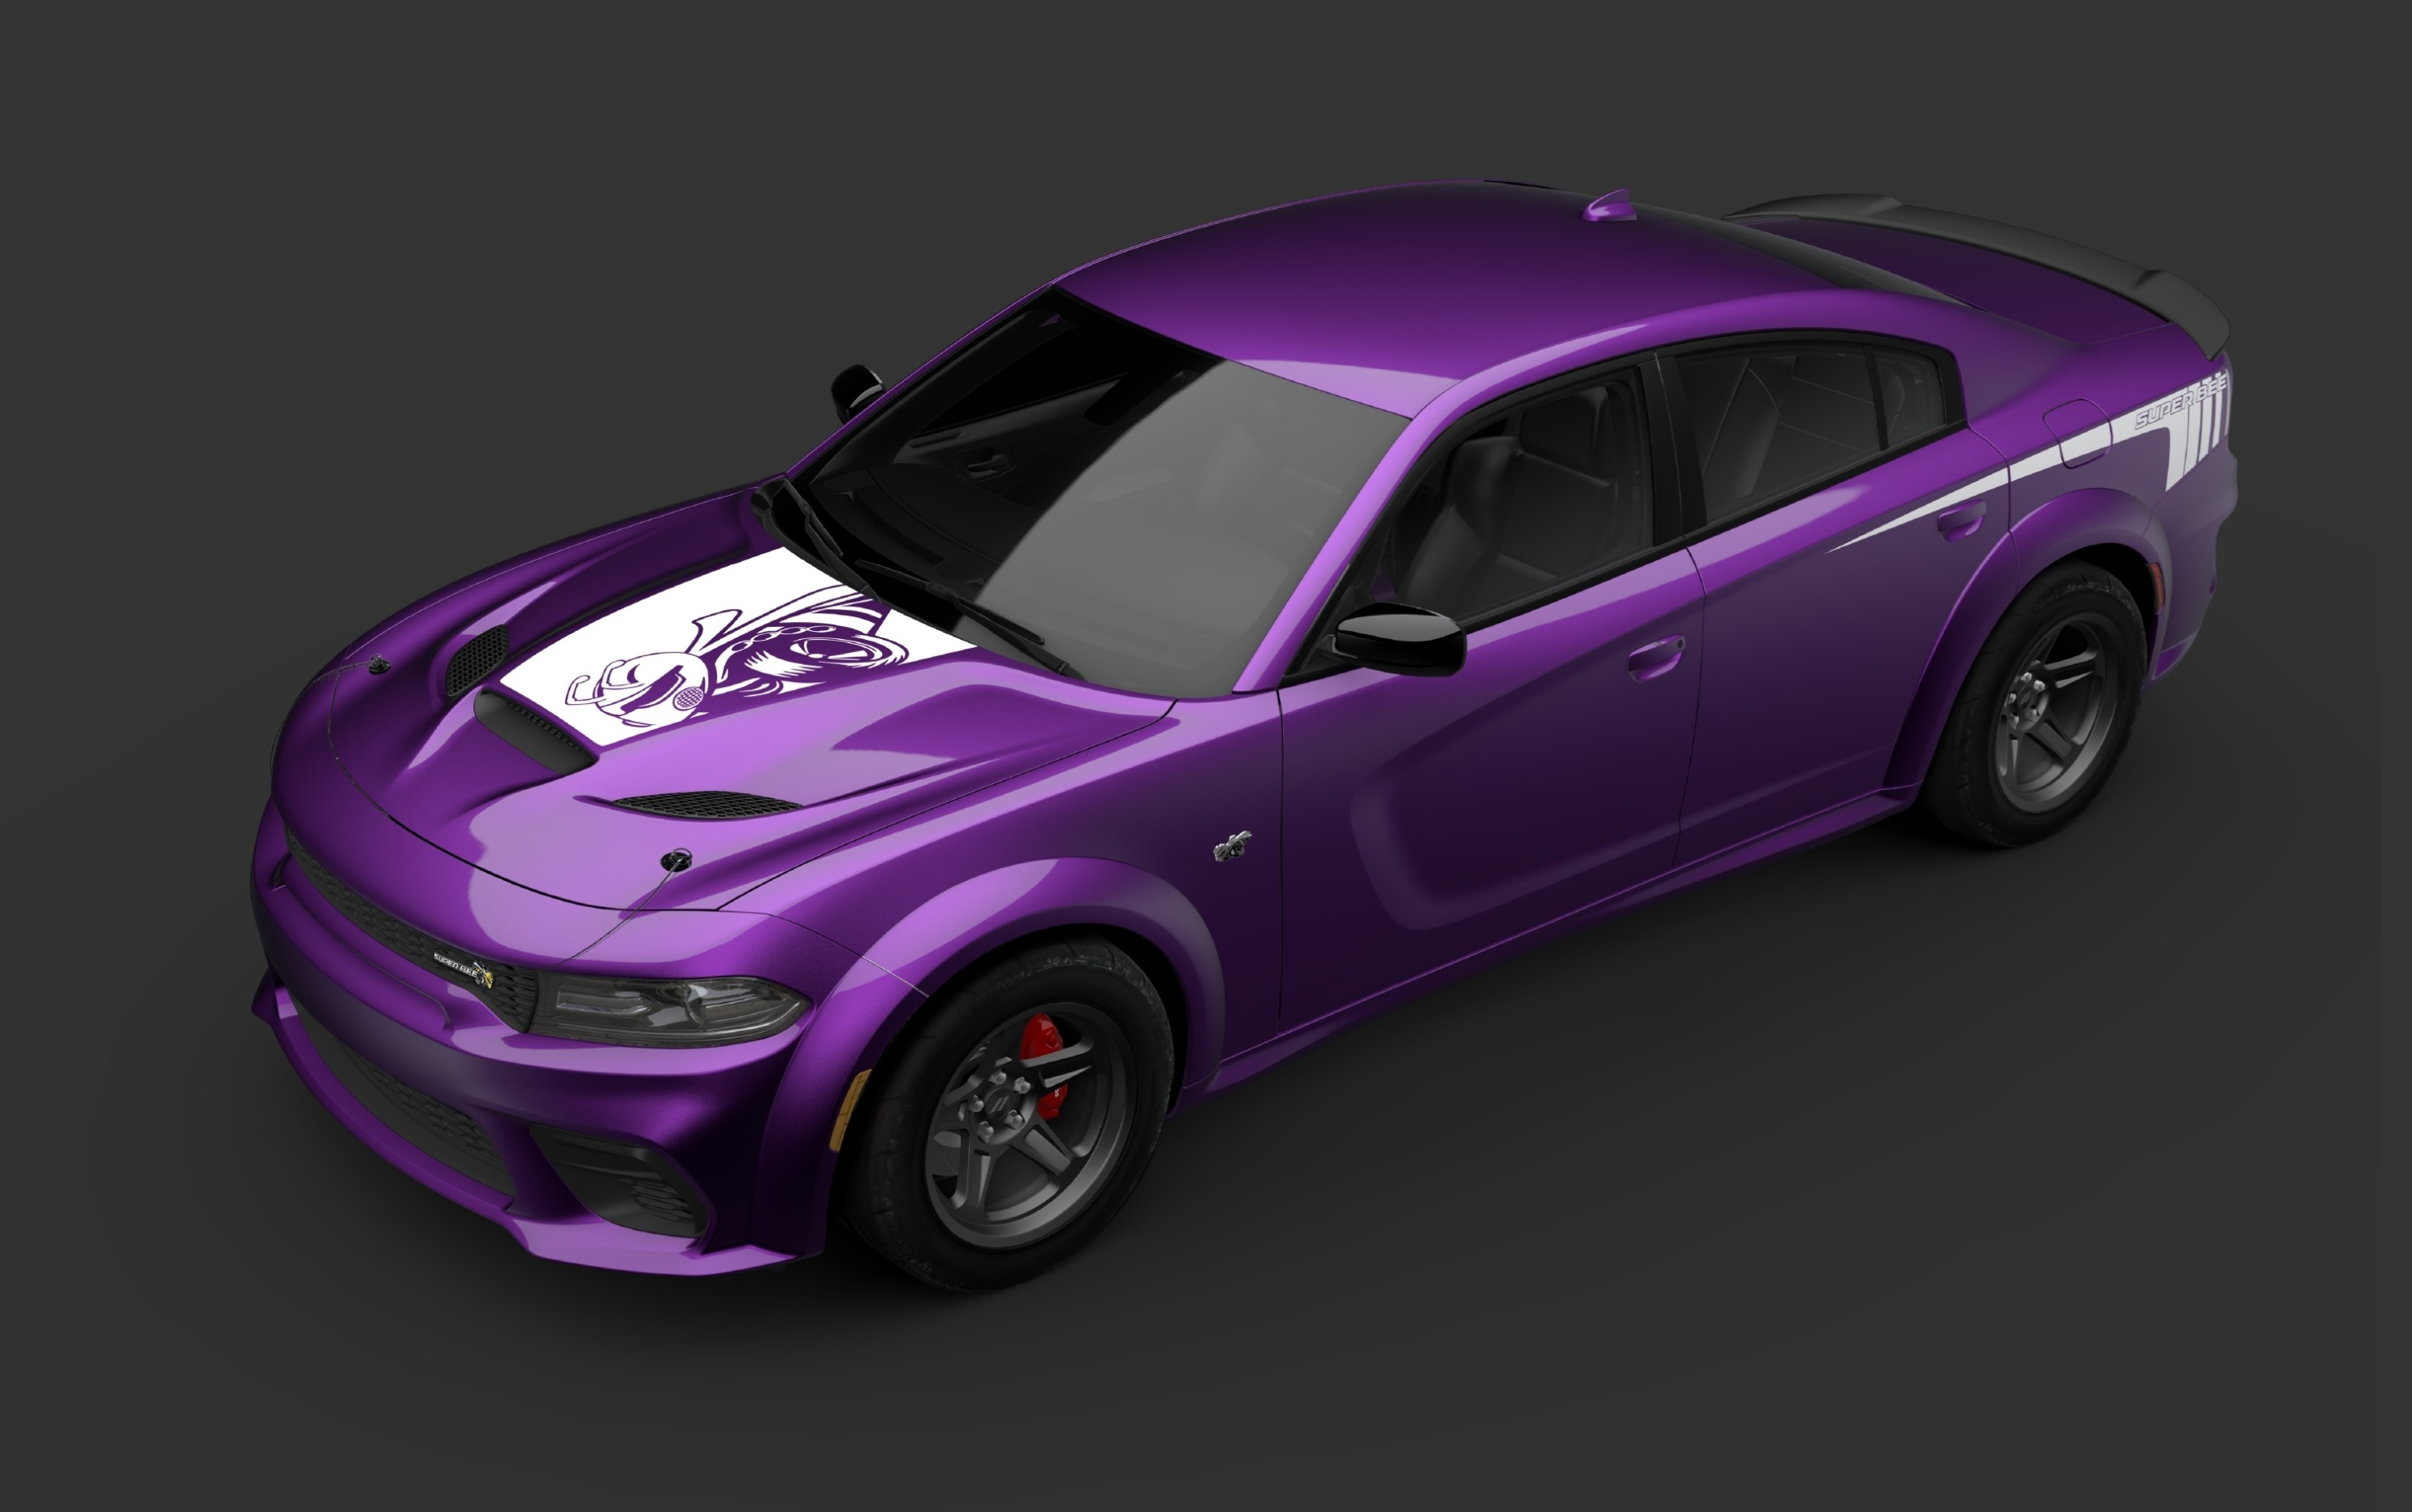 2023 Dodge Charger Super Bee “Last Call” Special Edition Limited to